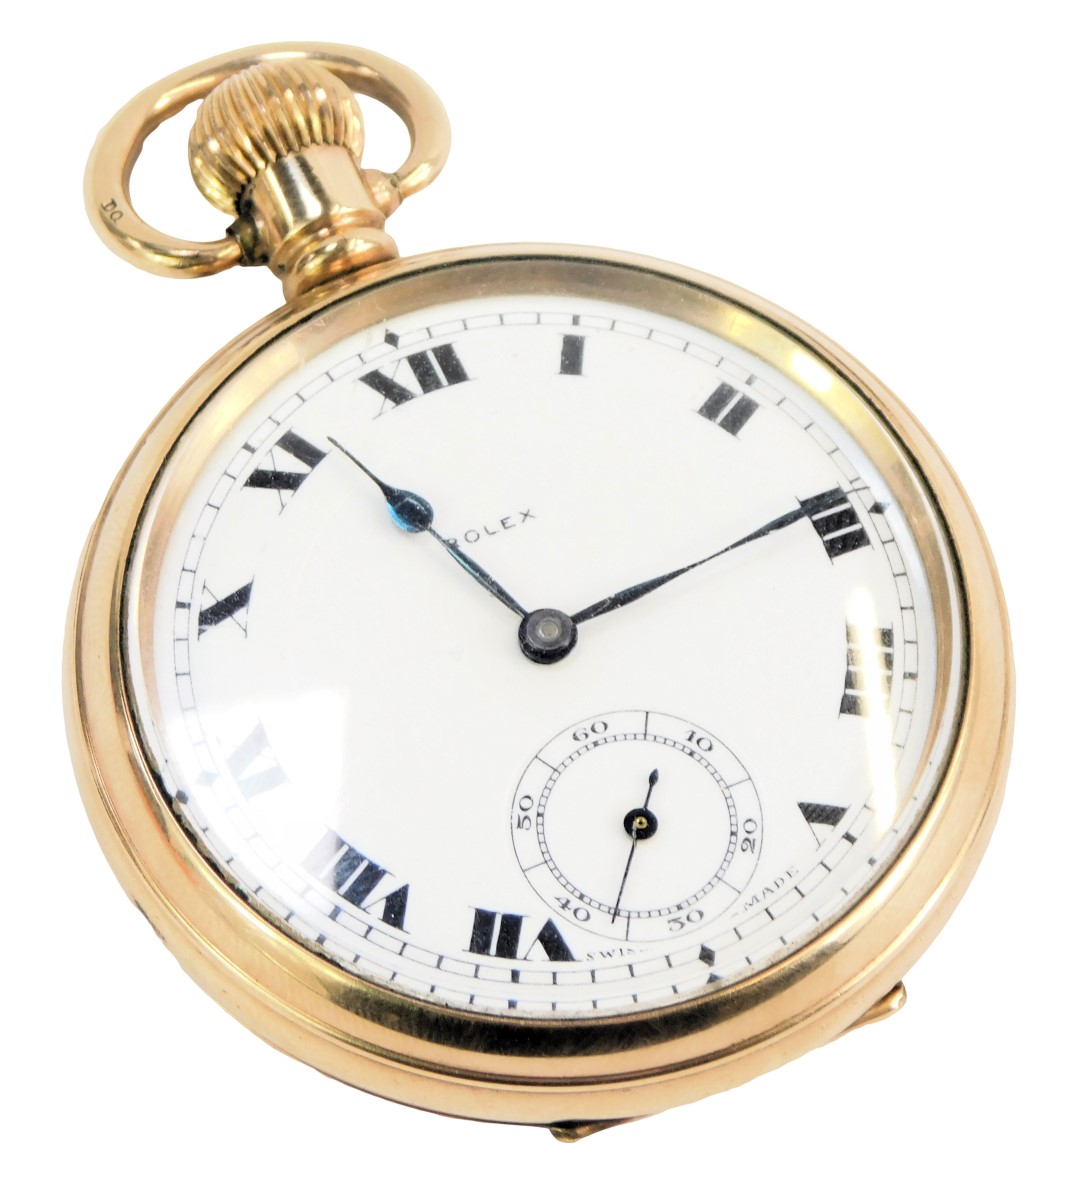 A Rolex gold plated pocket watch, with white enamel Roman numeric dial, seconds dial, and blue